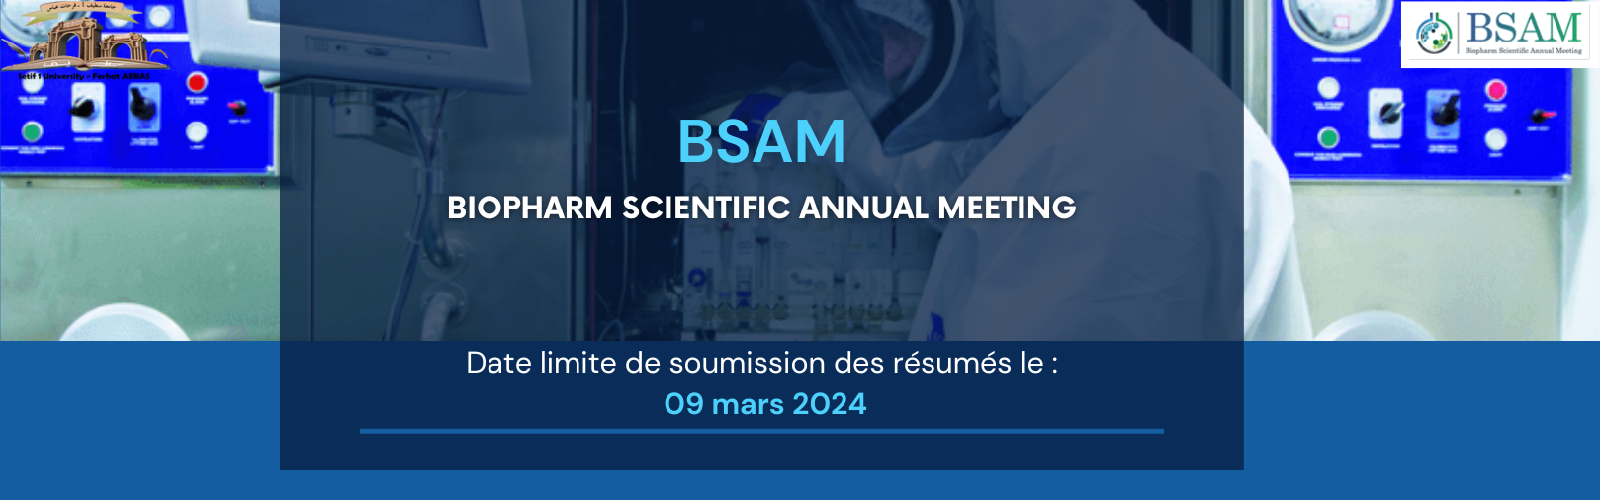 Call for papers for the 4th Biopahrm Scientific Annual Meeting (BSAM) 